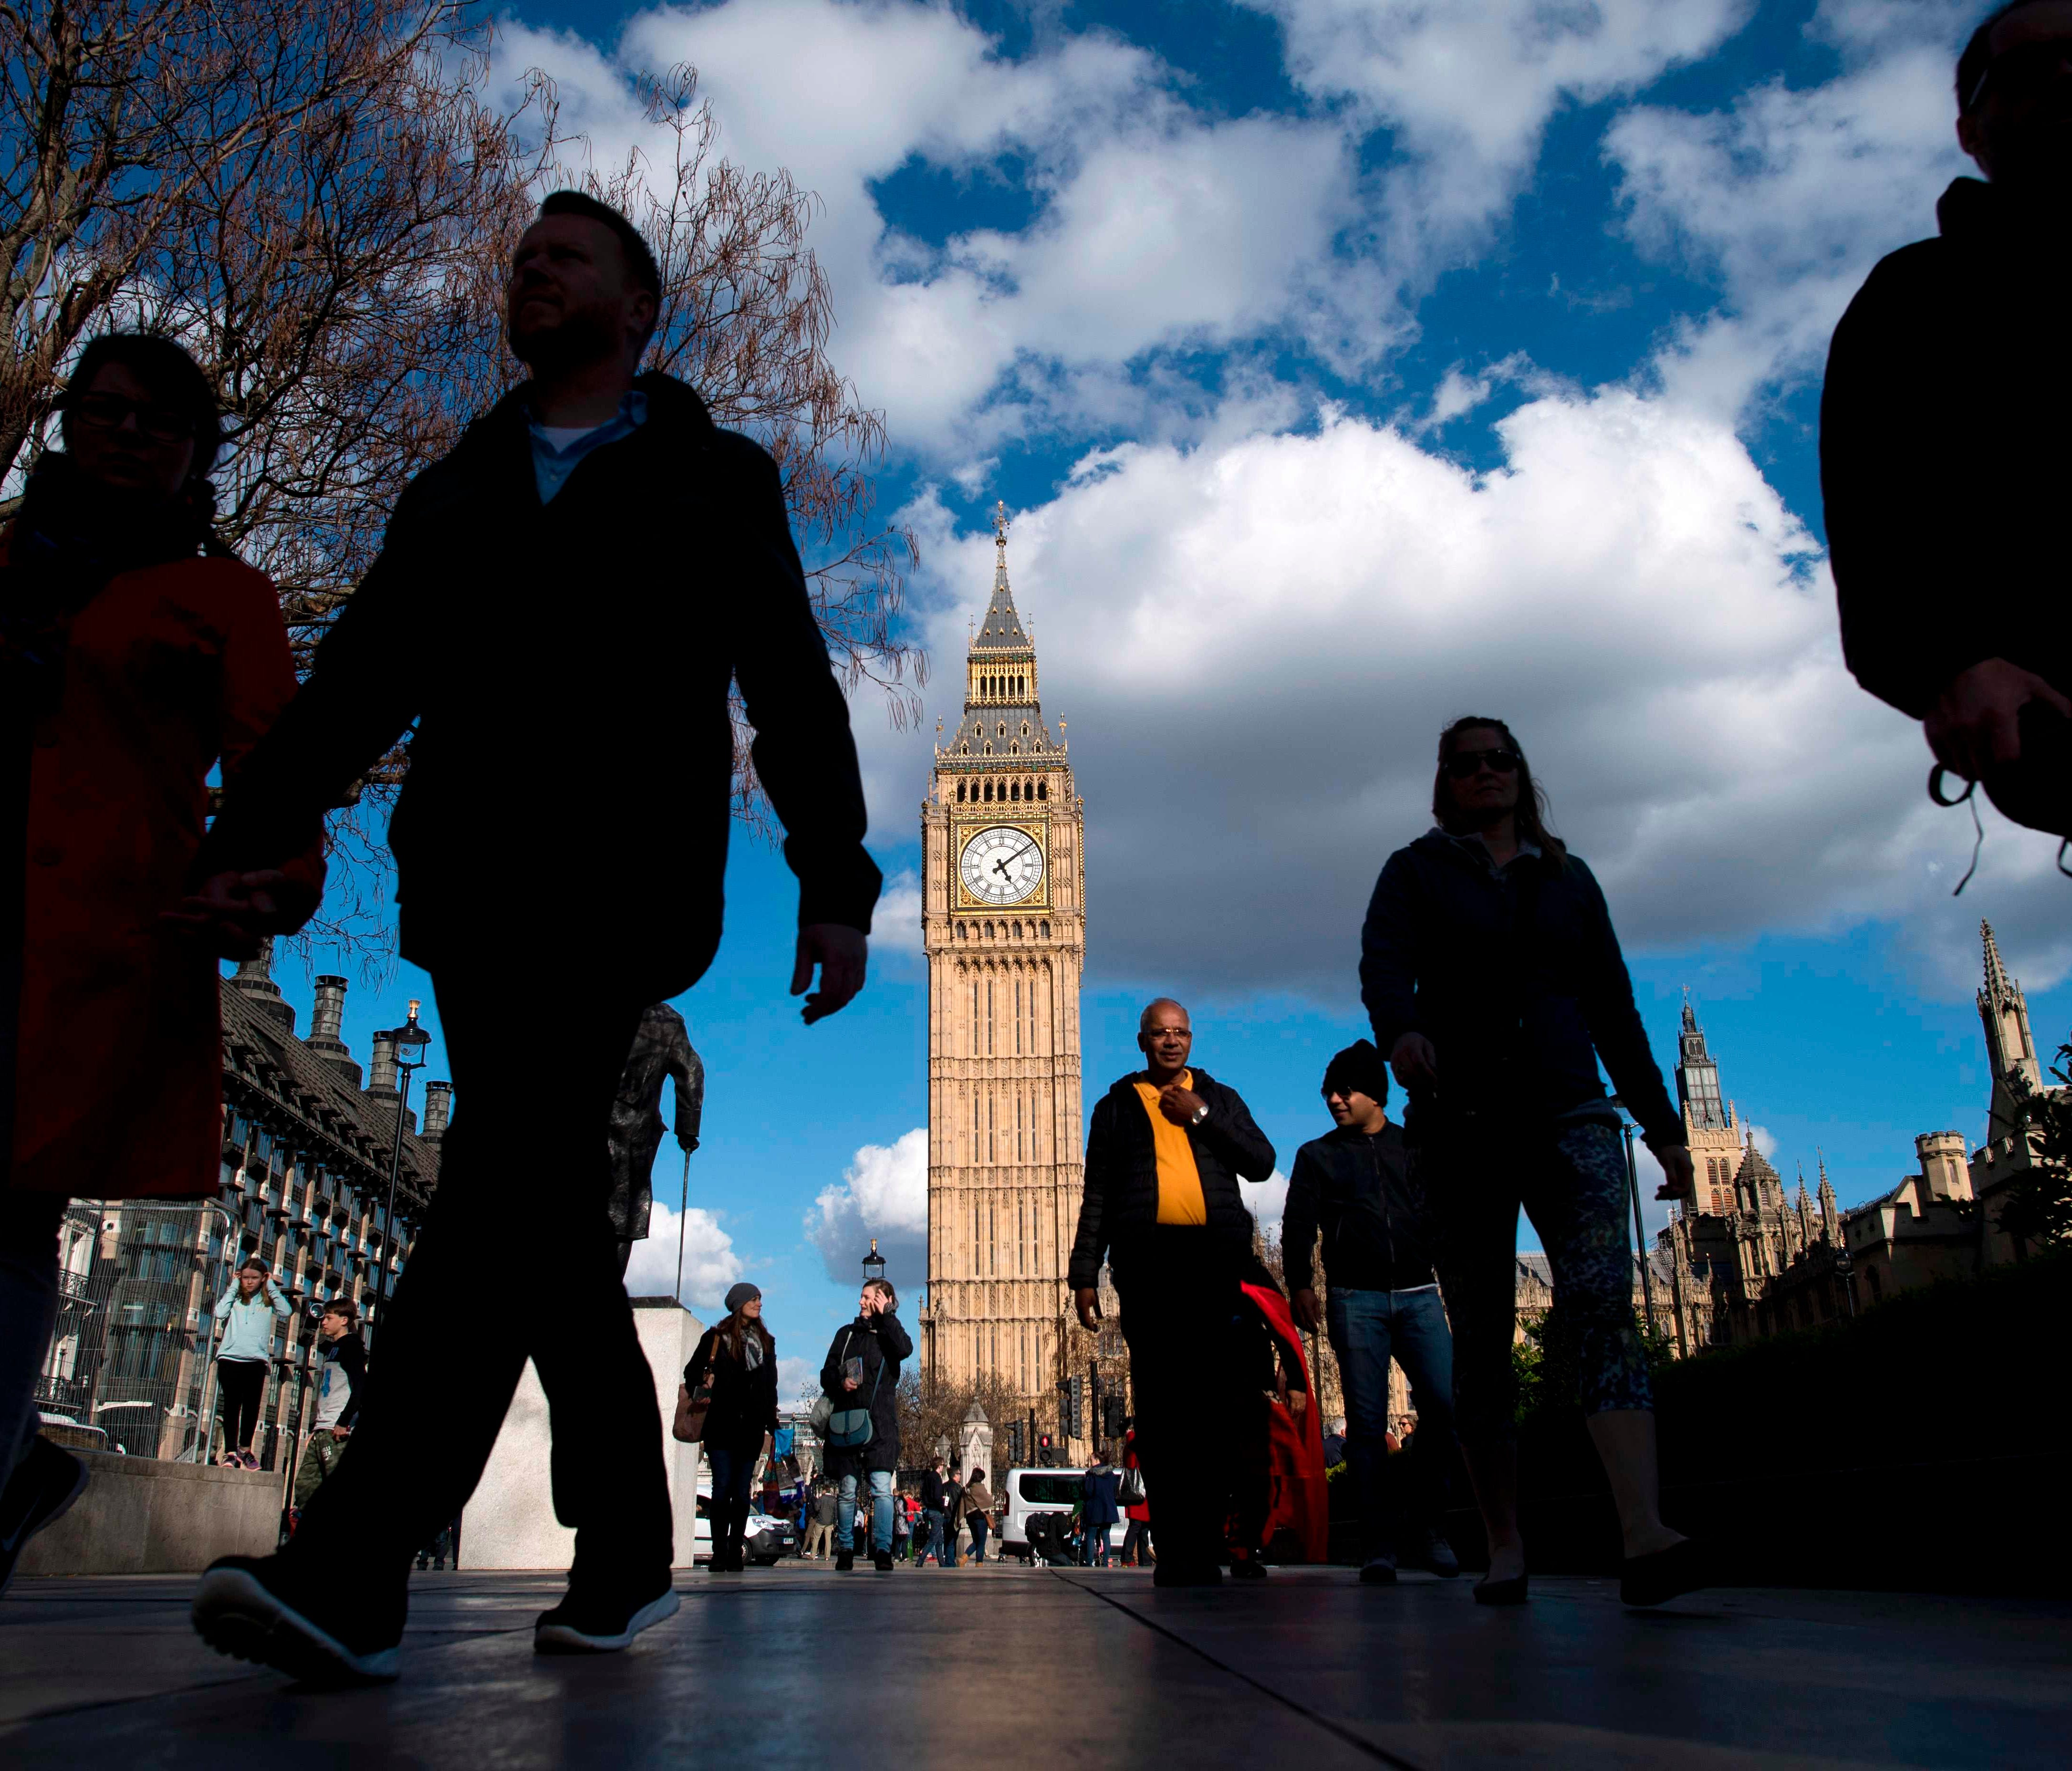 People walk near the Elizabeth Tower, commonly referred to as Big Ben, near the Houses of Parliament in Westminster, central London.  British Prime Minister Theresa May called for a snap election on June 8, in a shock move as she seeks to bolster her 